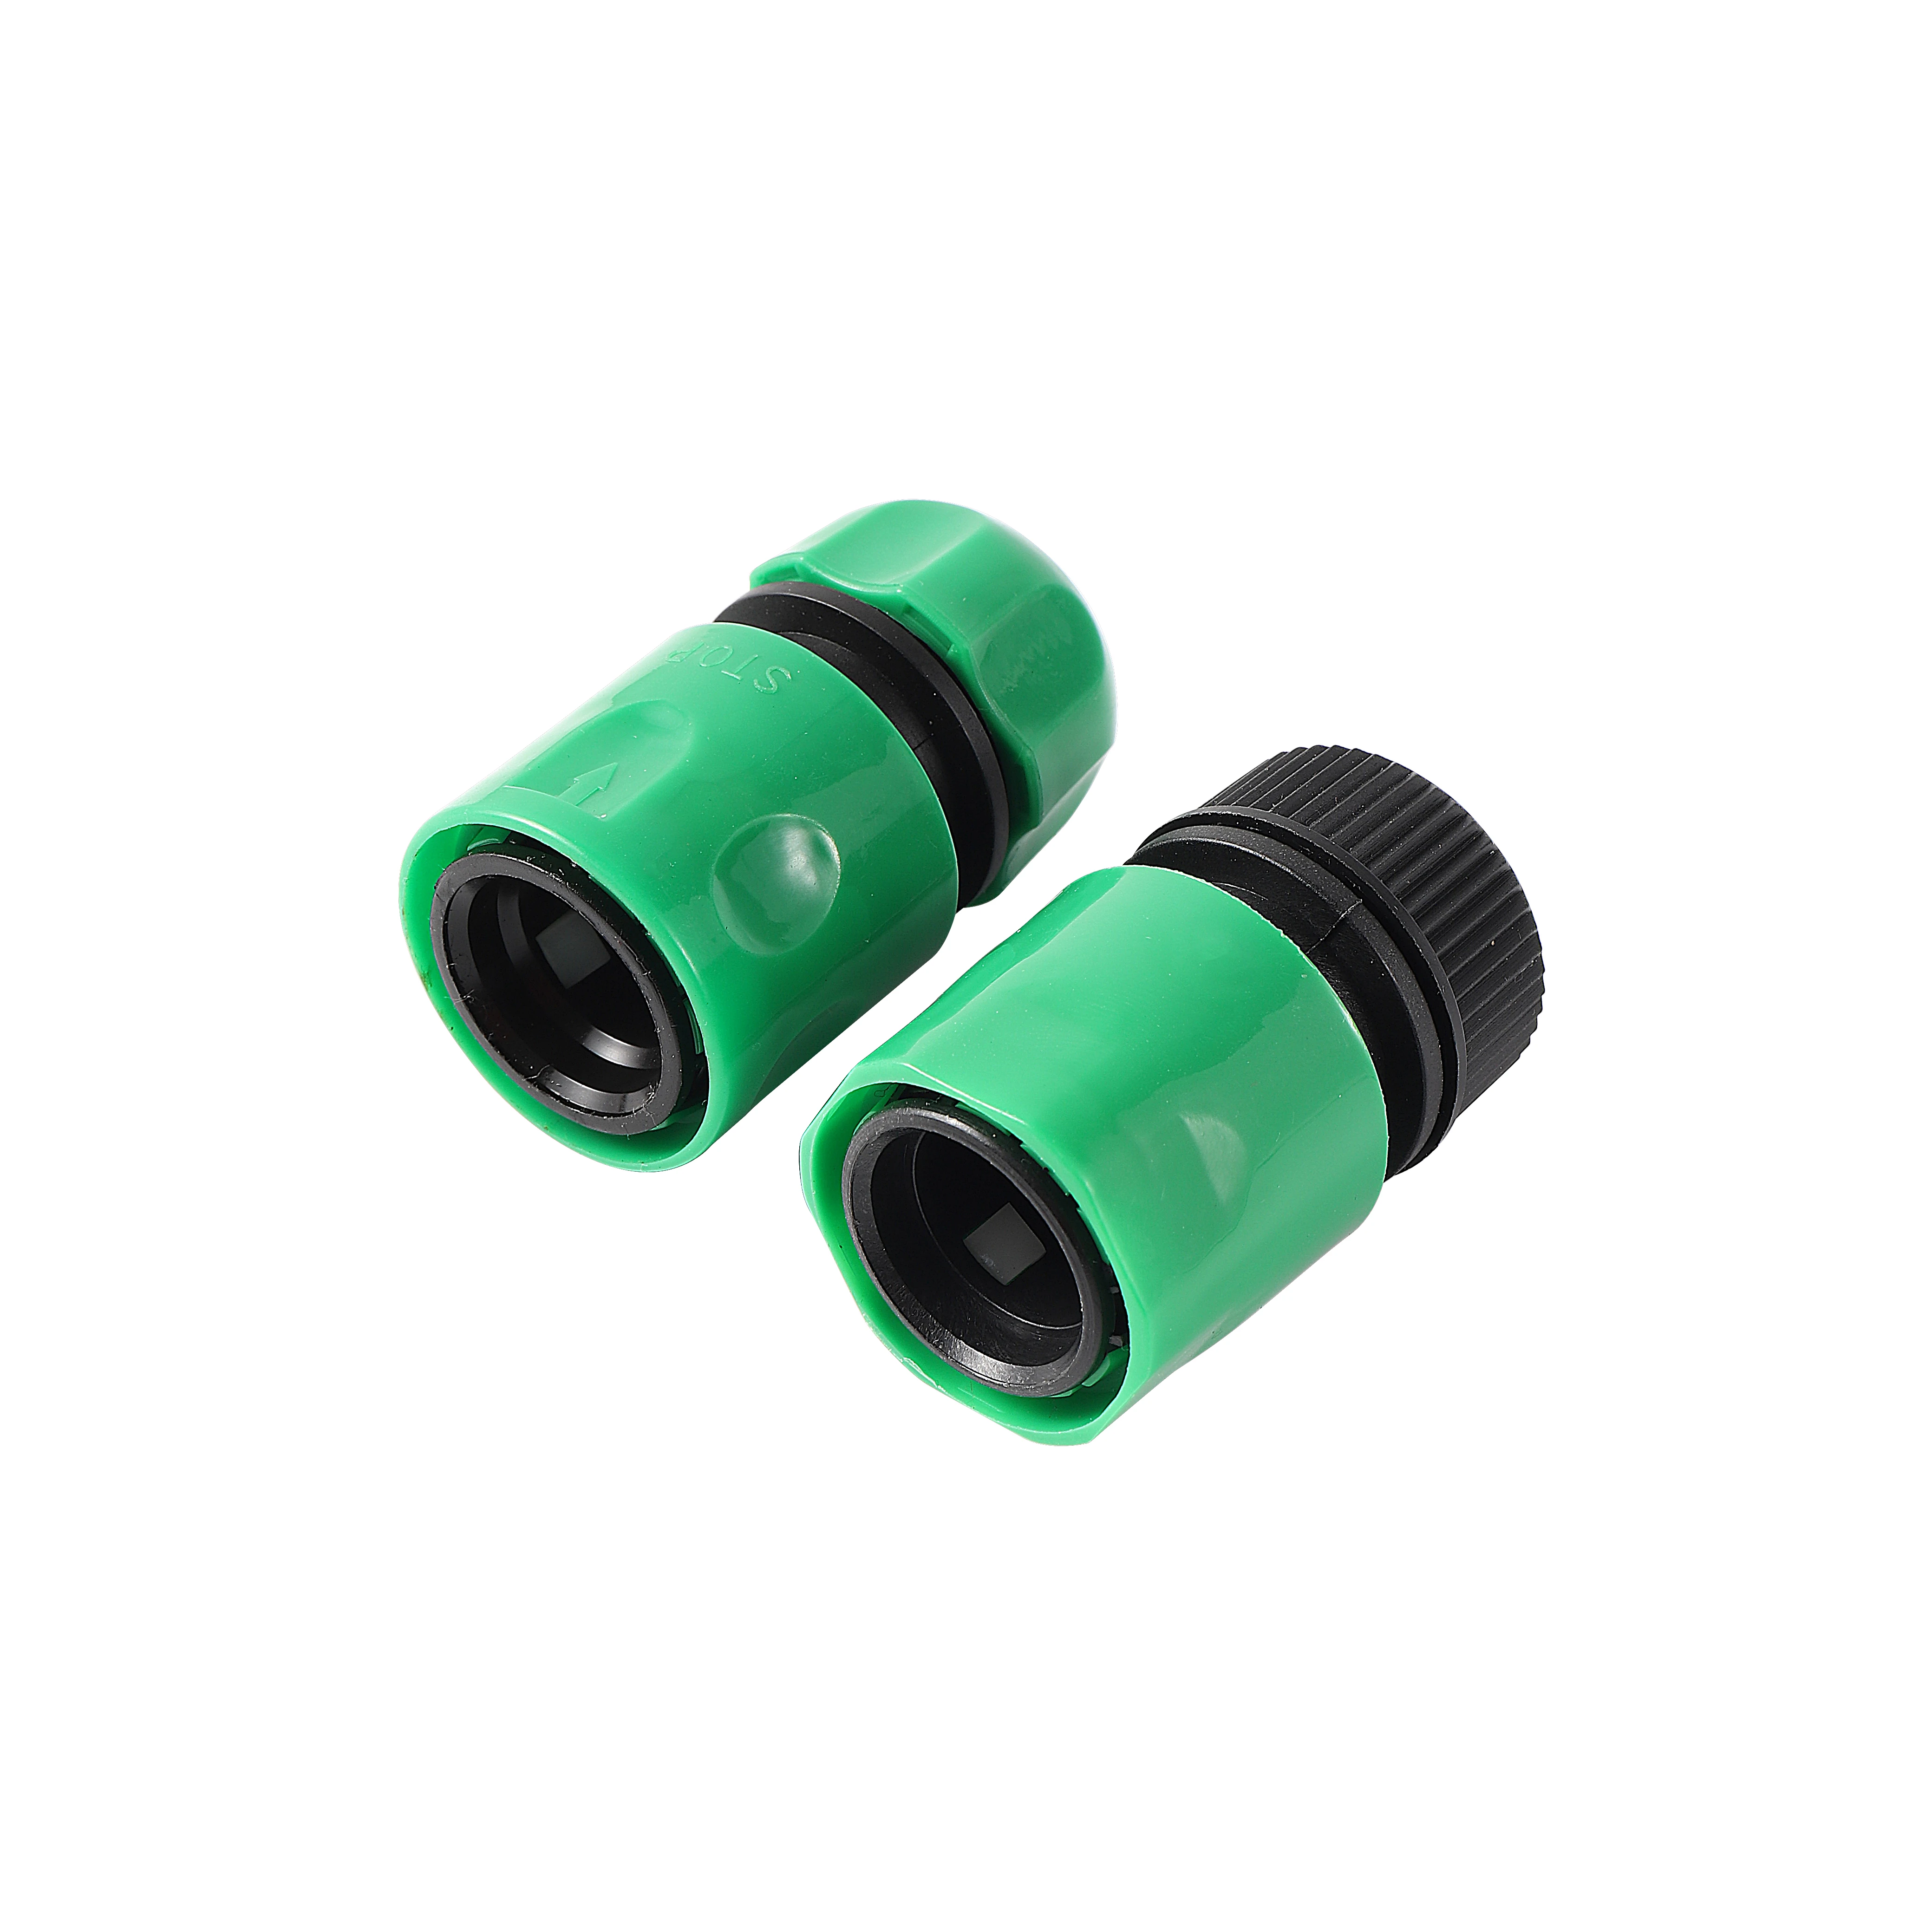 

2Pcs 16mm Pipe Quick Connector Garden Water Tube Waterstop No Return Quick Access Coupling Garden Irrigation Car Washing Fitting